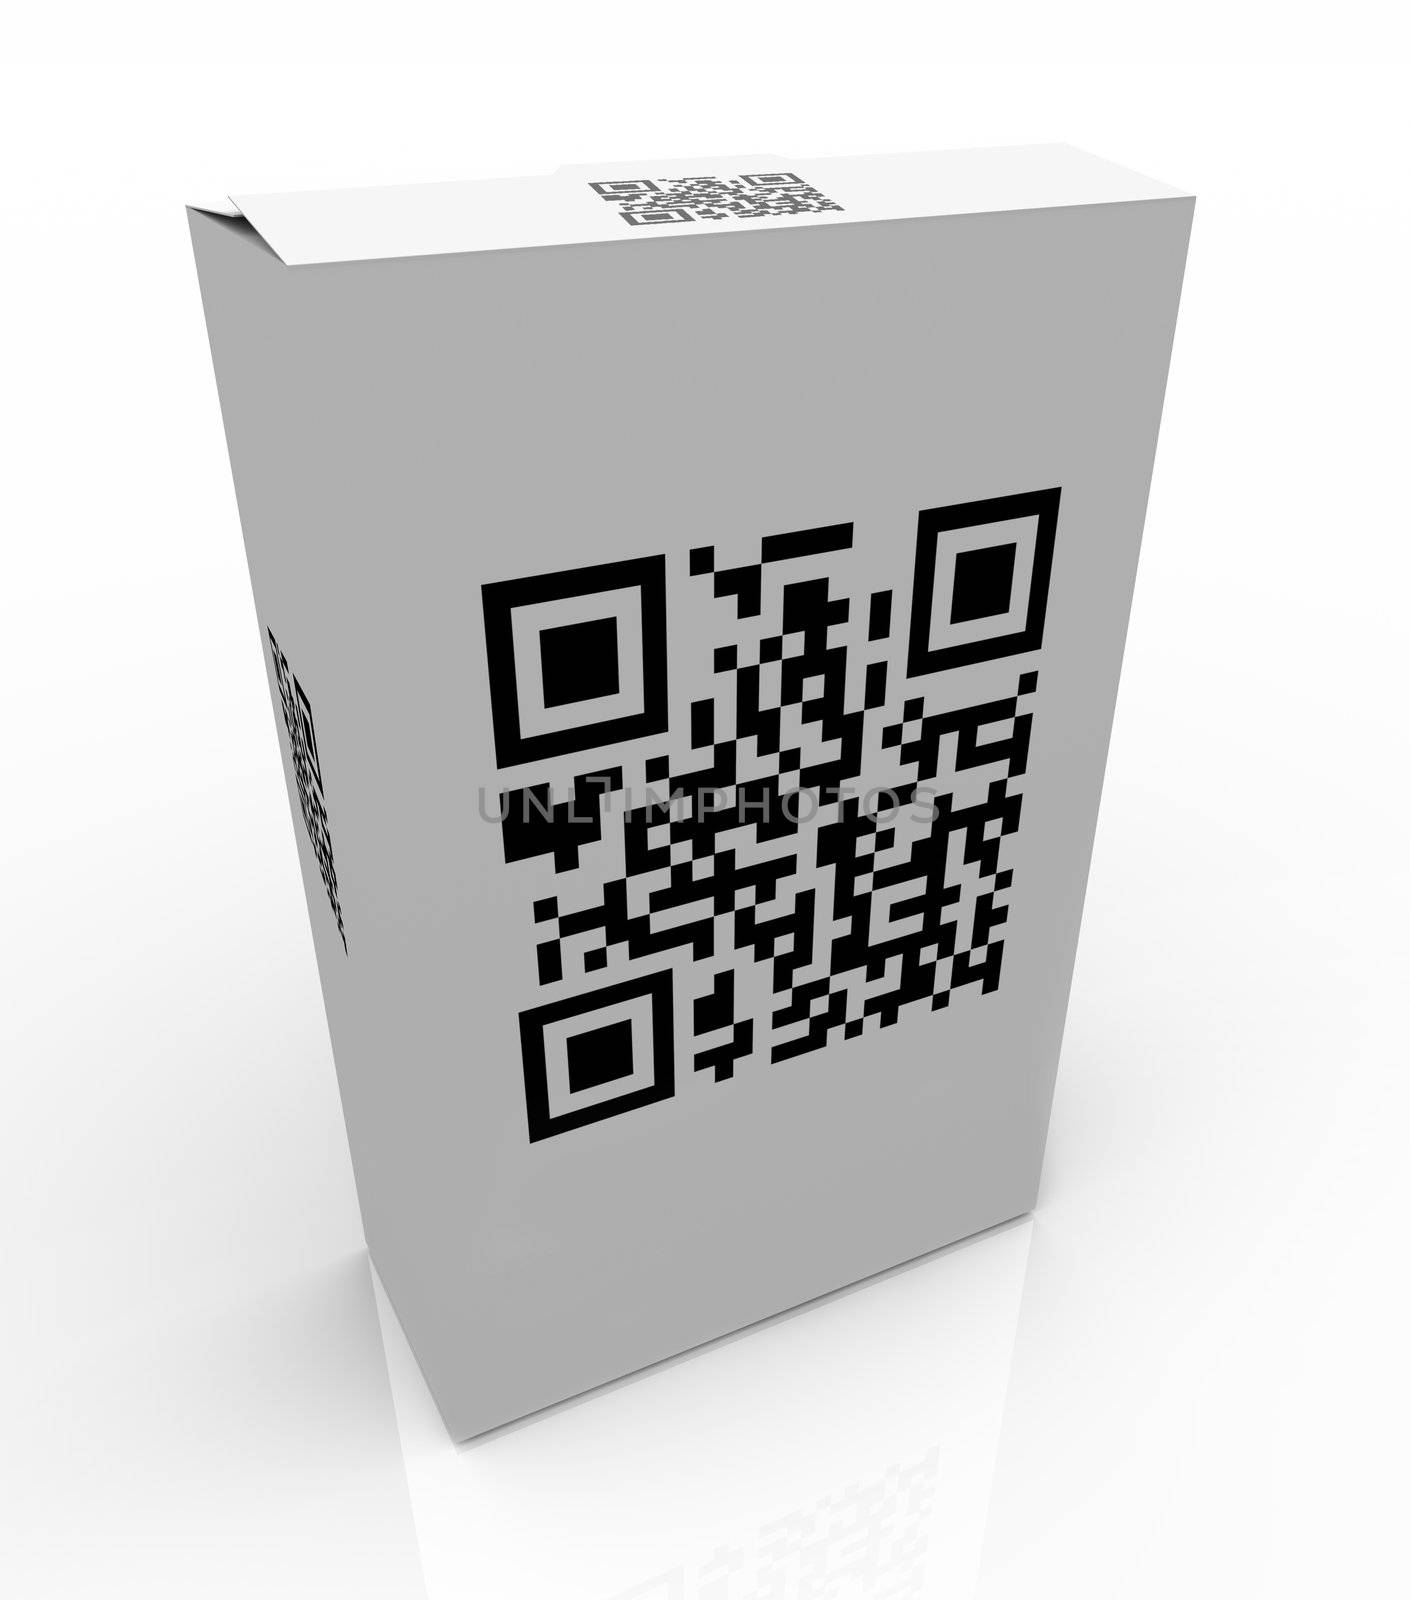 QR Product Code on Box for Scanning Barcode  by iQoncept